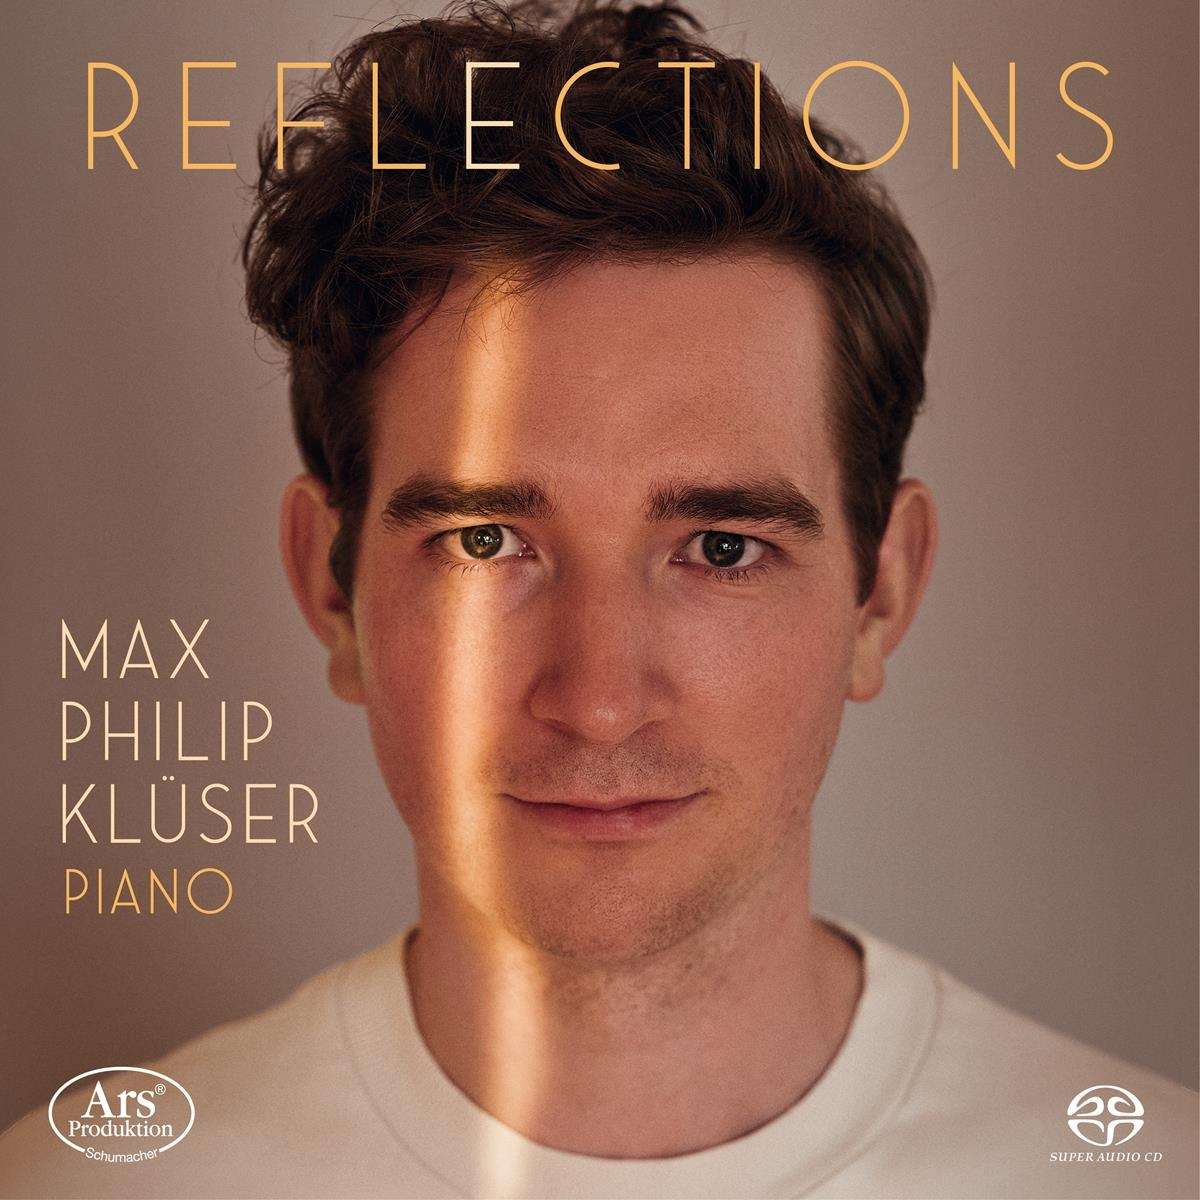 Review by Max Philipp Clouser – Reflections